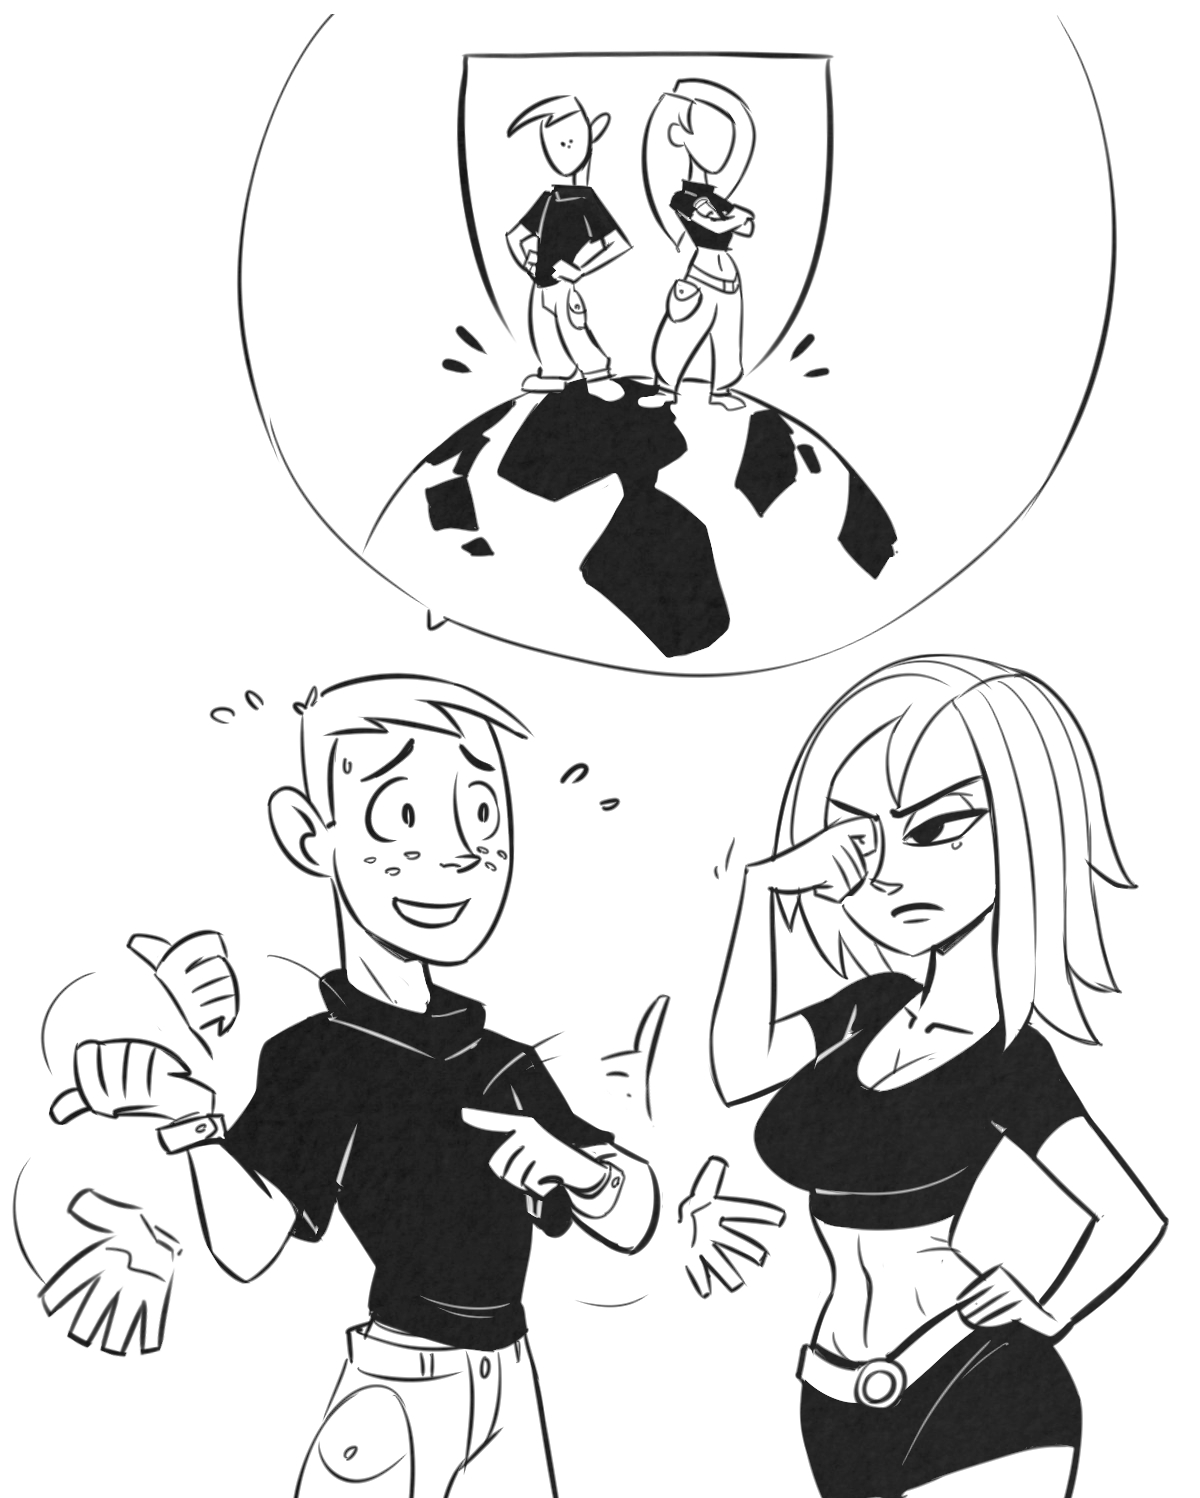 Hot drawn porn with Kim Possible and Ron!